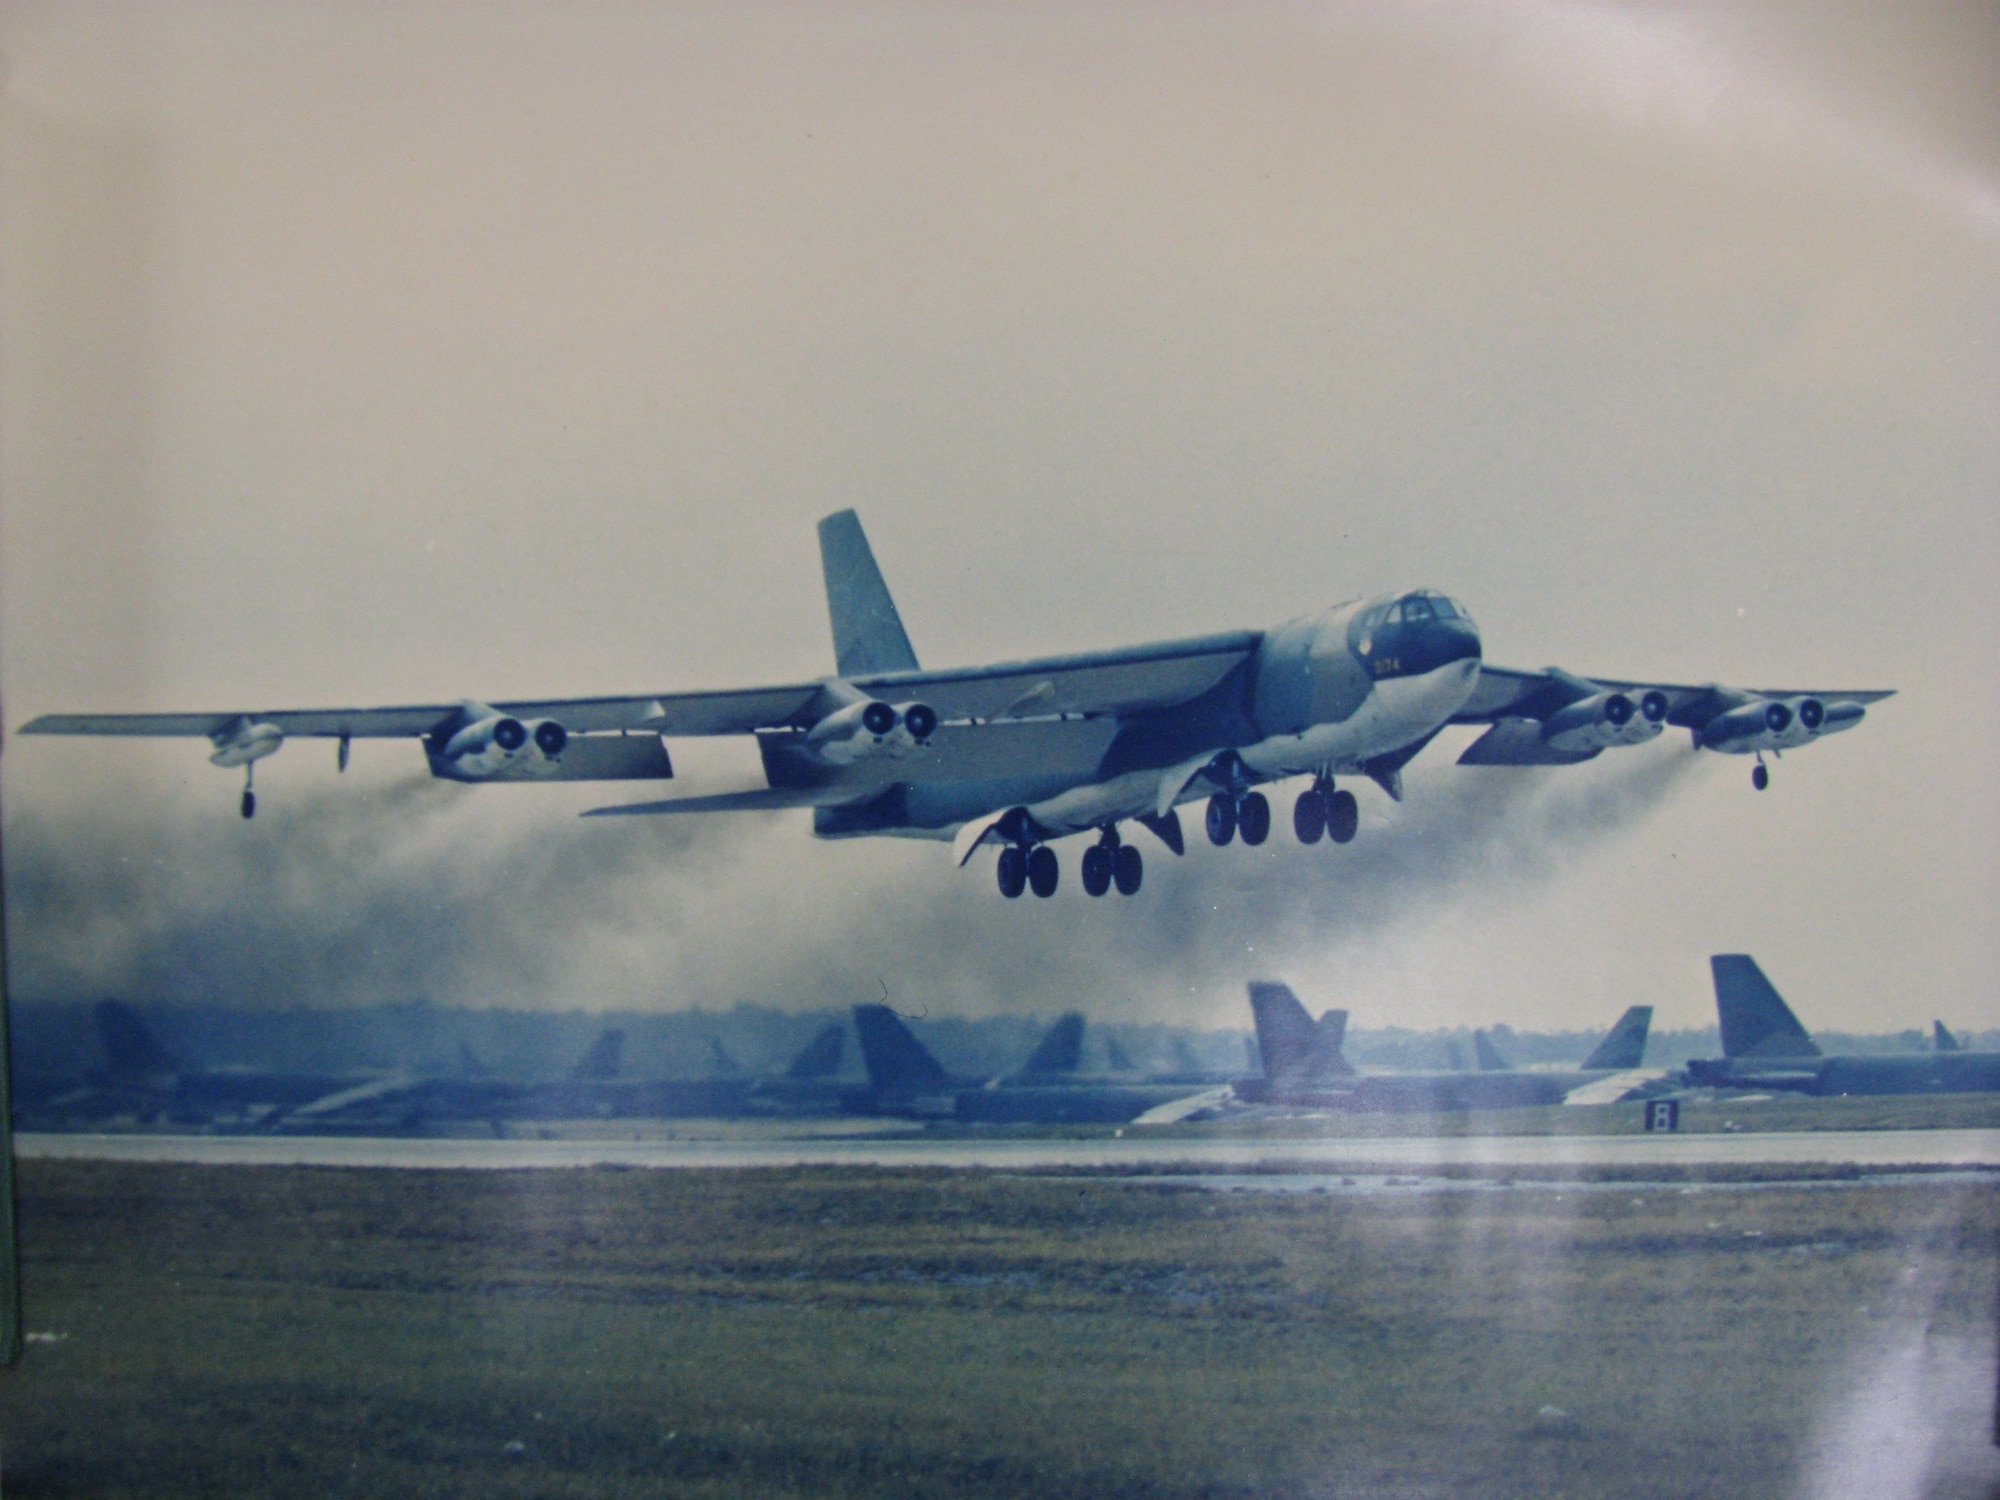 On to the Next Mission: A B-52 bomber takes off from Andersen Air Force Base in support of Linebacker II. (Photo courtesy of U.S. Air Force)